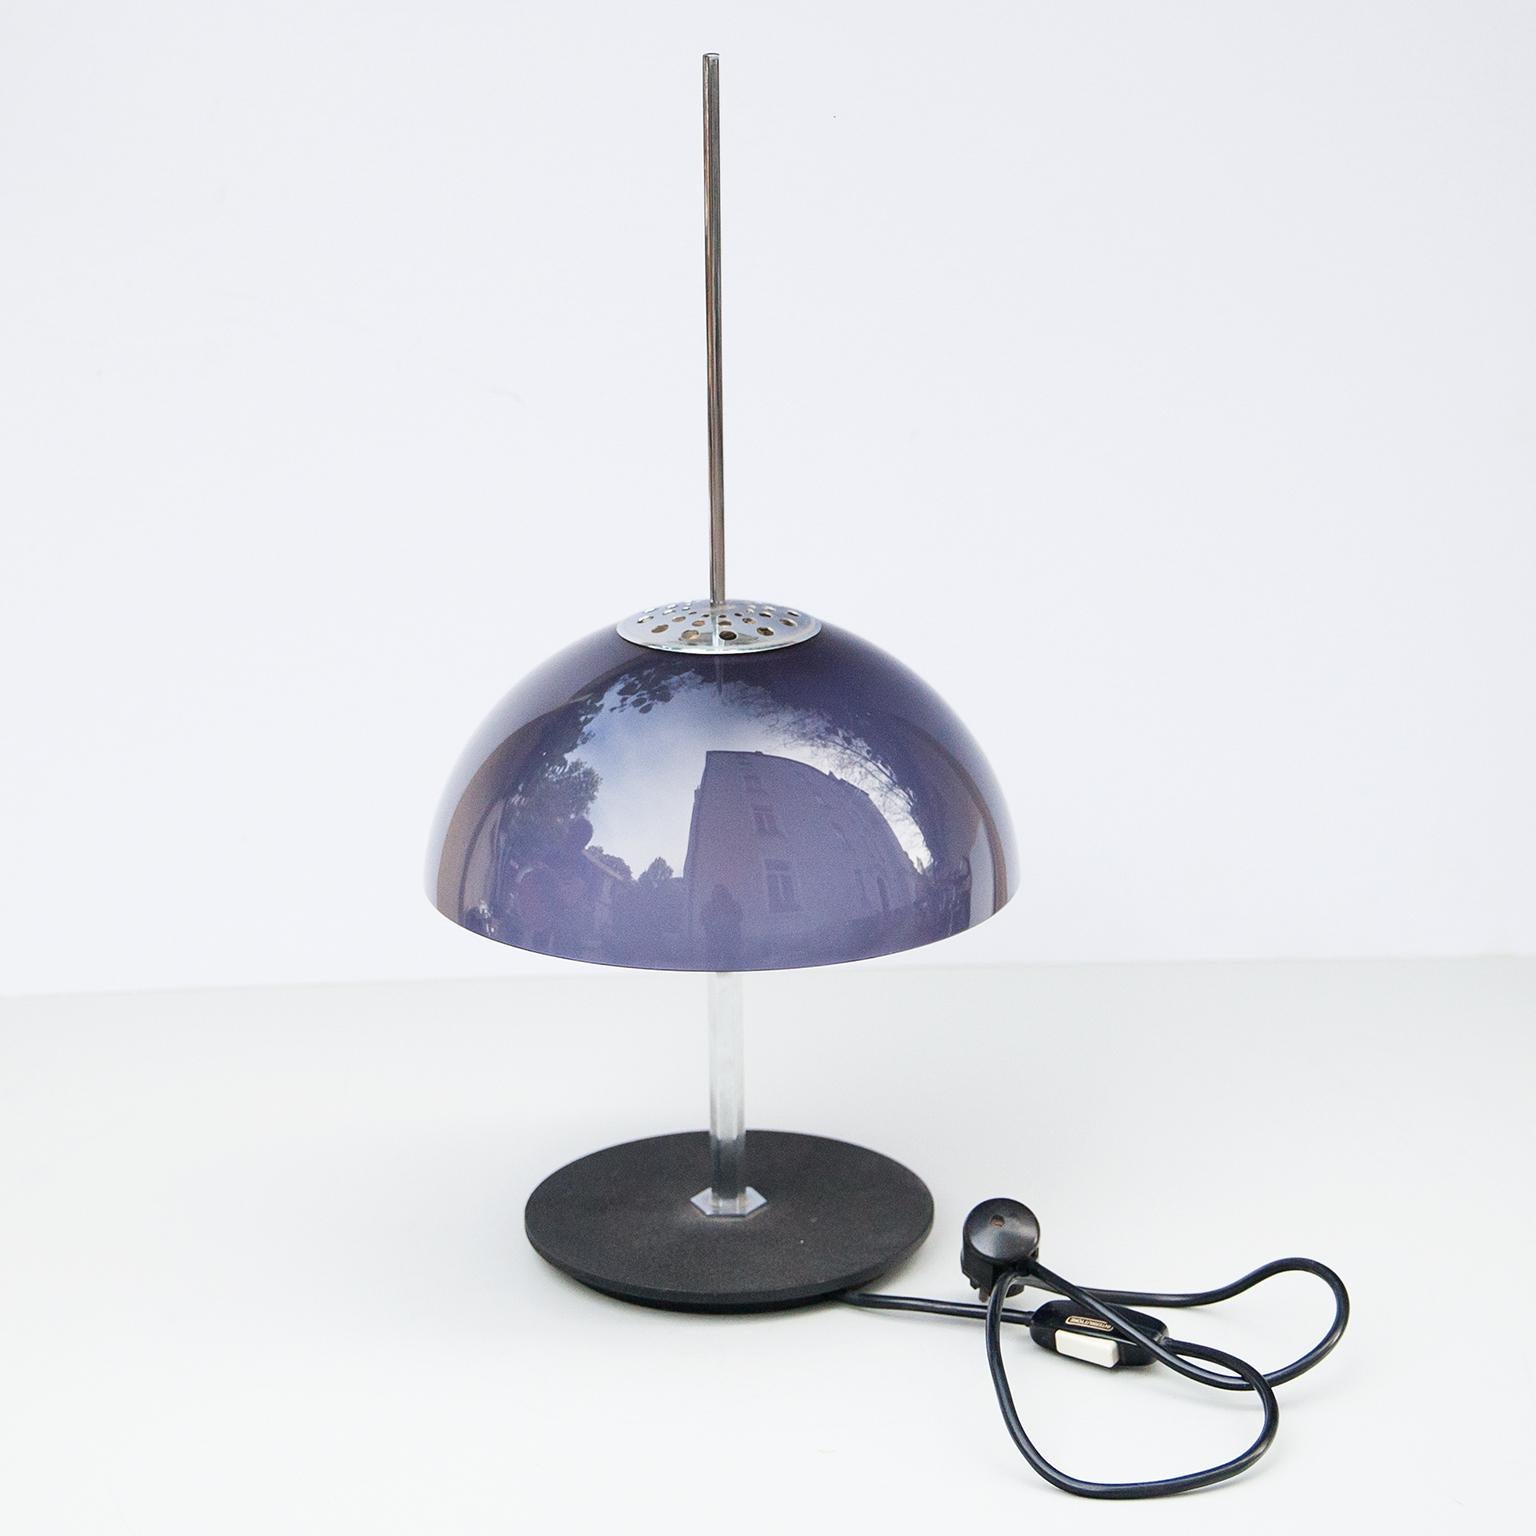 Very rare table lamp N584p by Gino Sarfatti designed in black lacquered crackled metal base, chrome metal stem, and smoked purple perspex lampshade, original Arteluce label under the shade. Excellent vintage condition.
57 H x 35 D cm
Gino Sarfatti